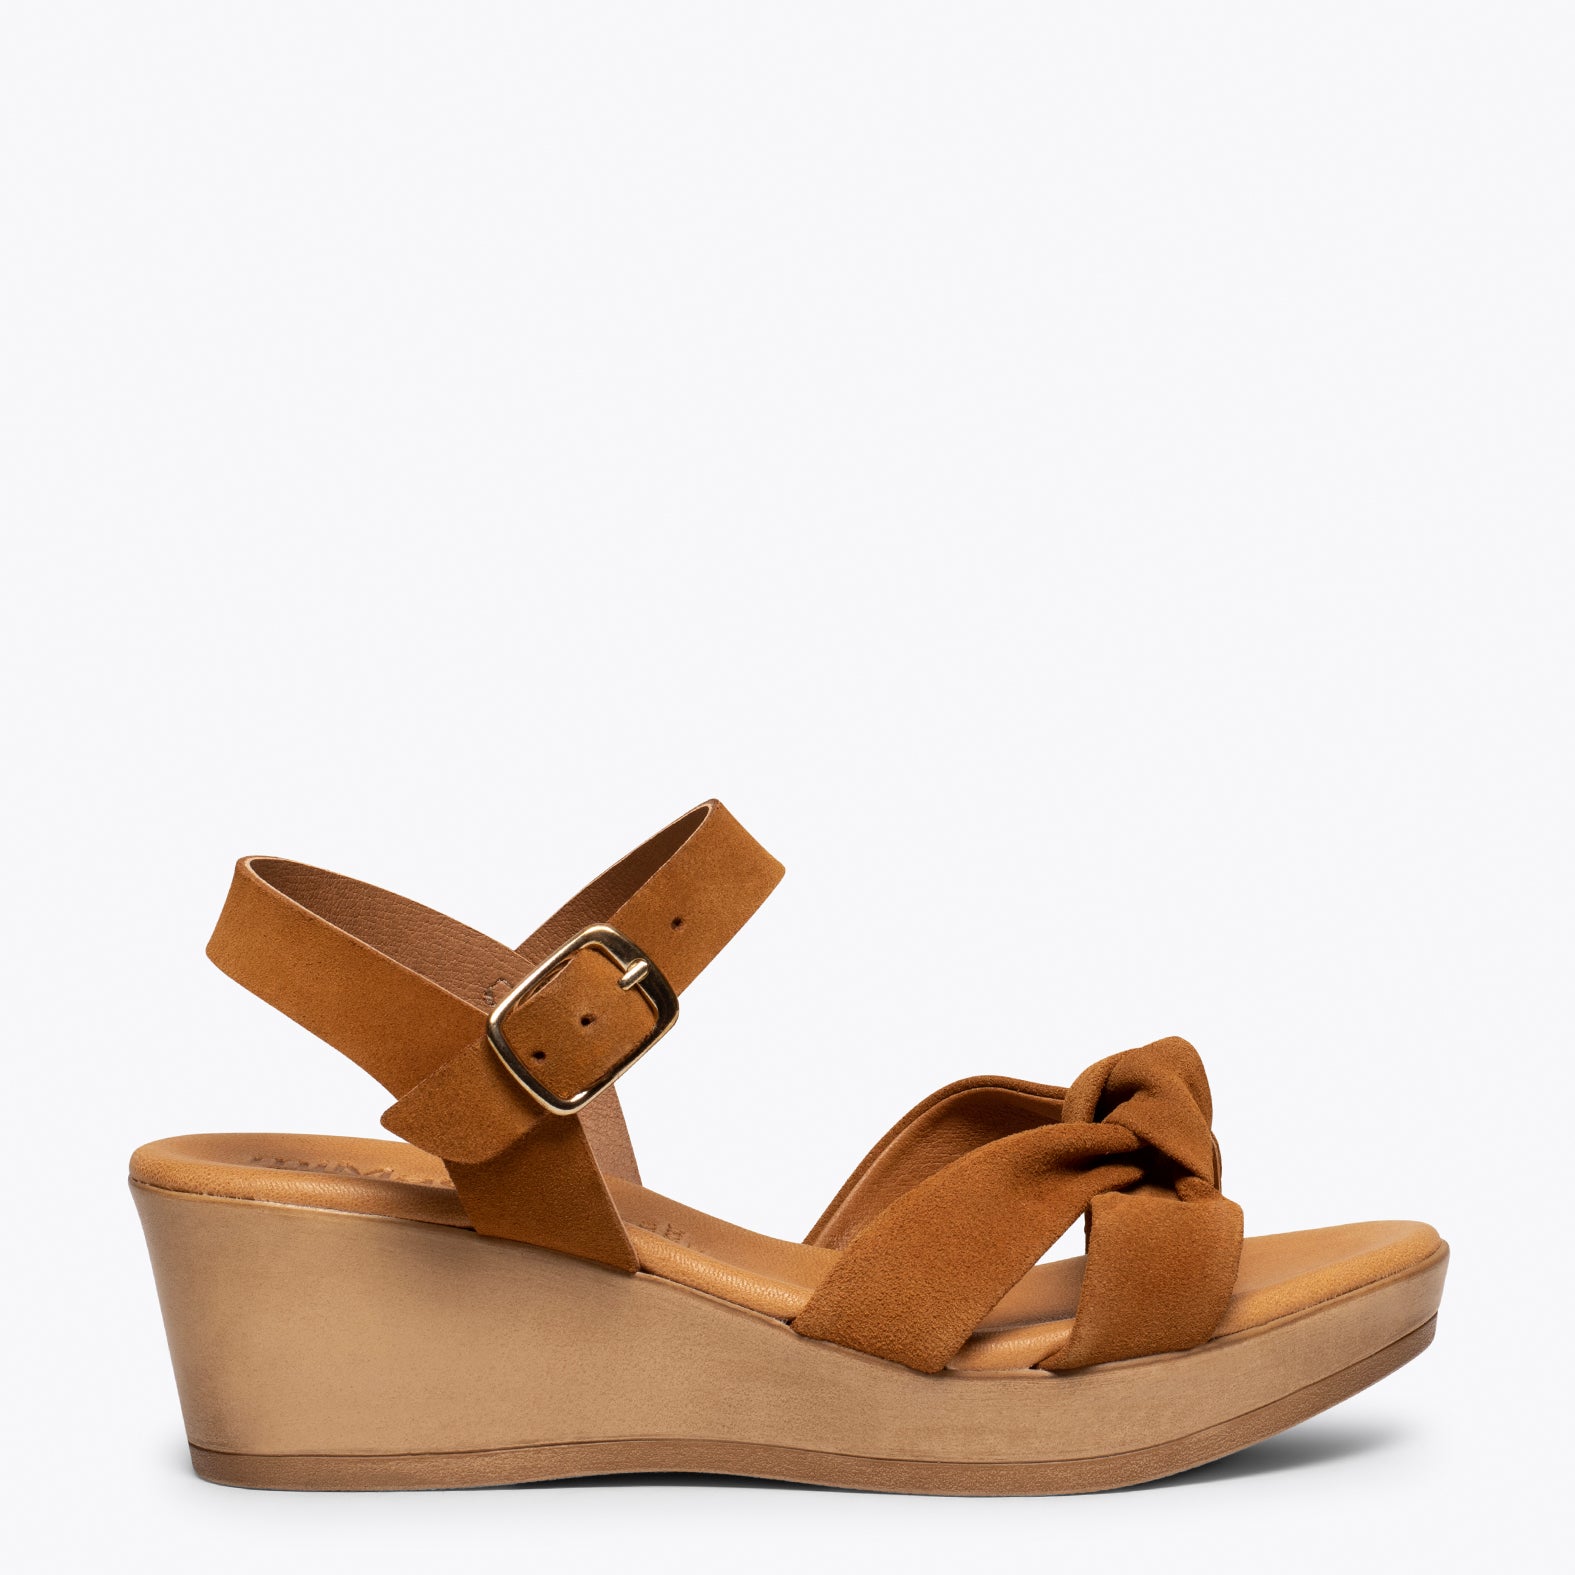 LACE – CAMEL classic wedge with platform